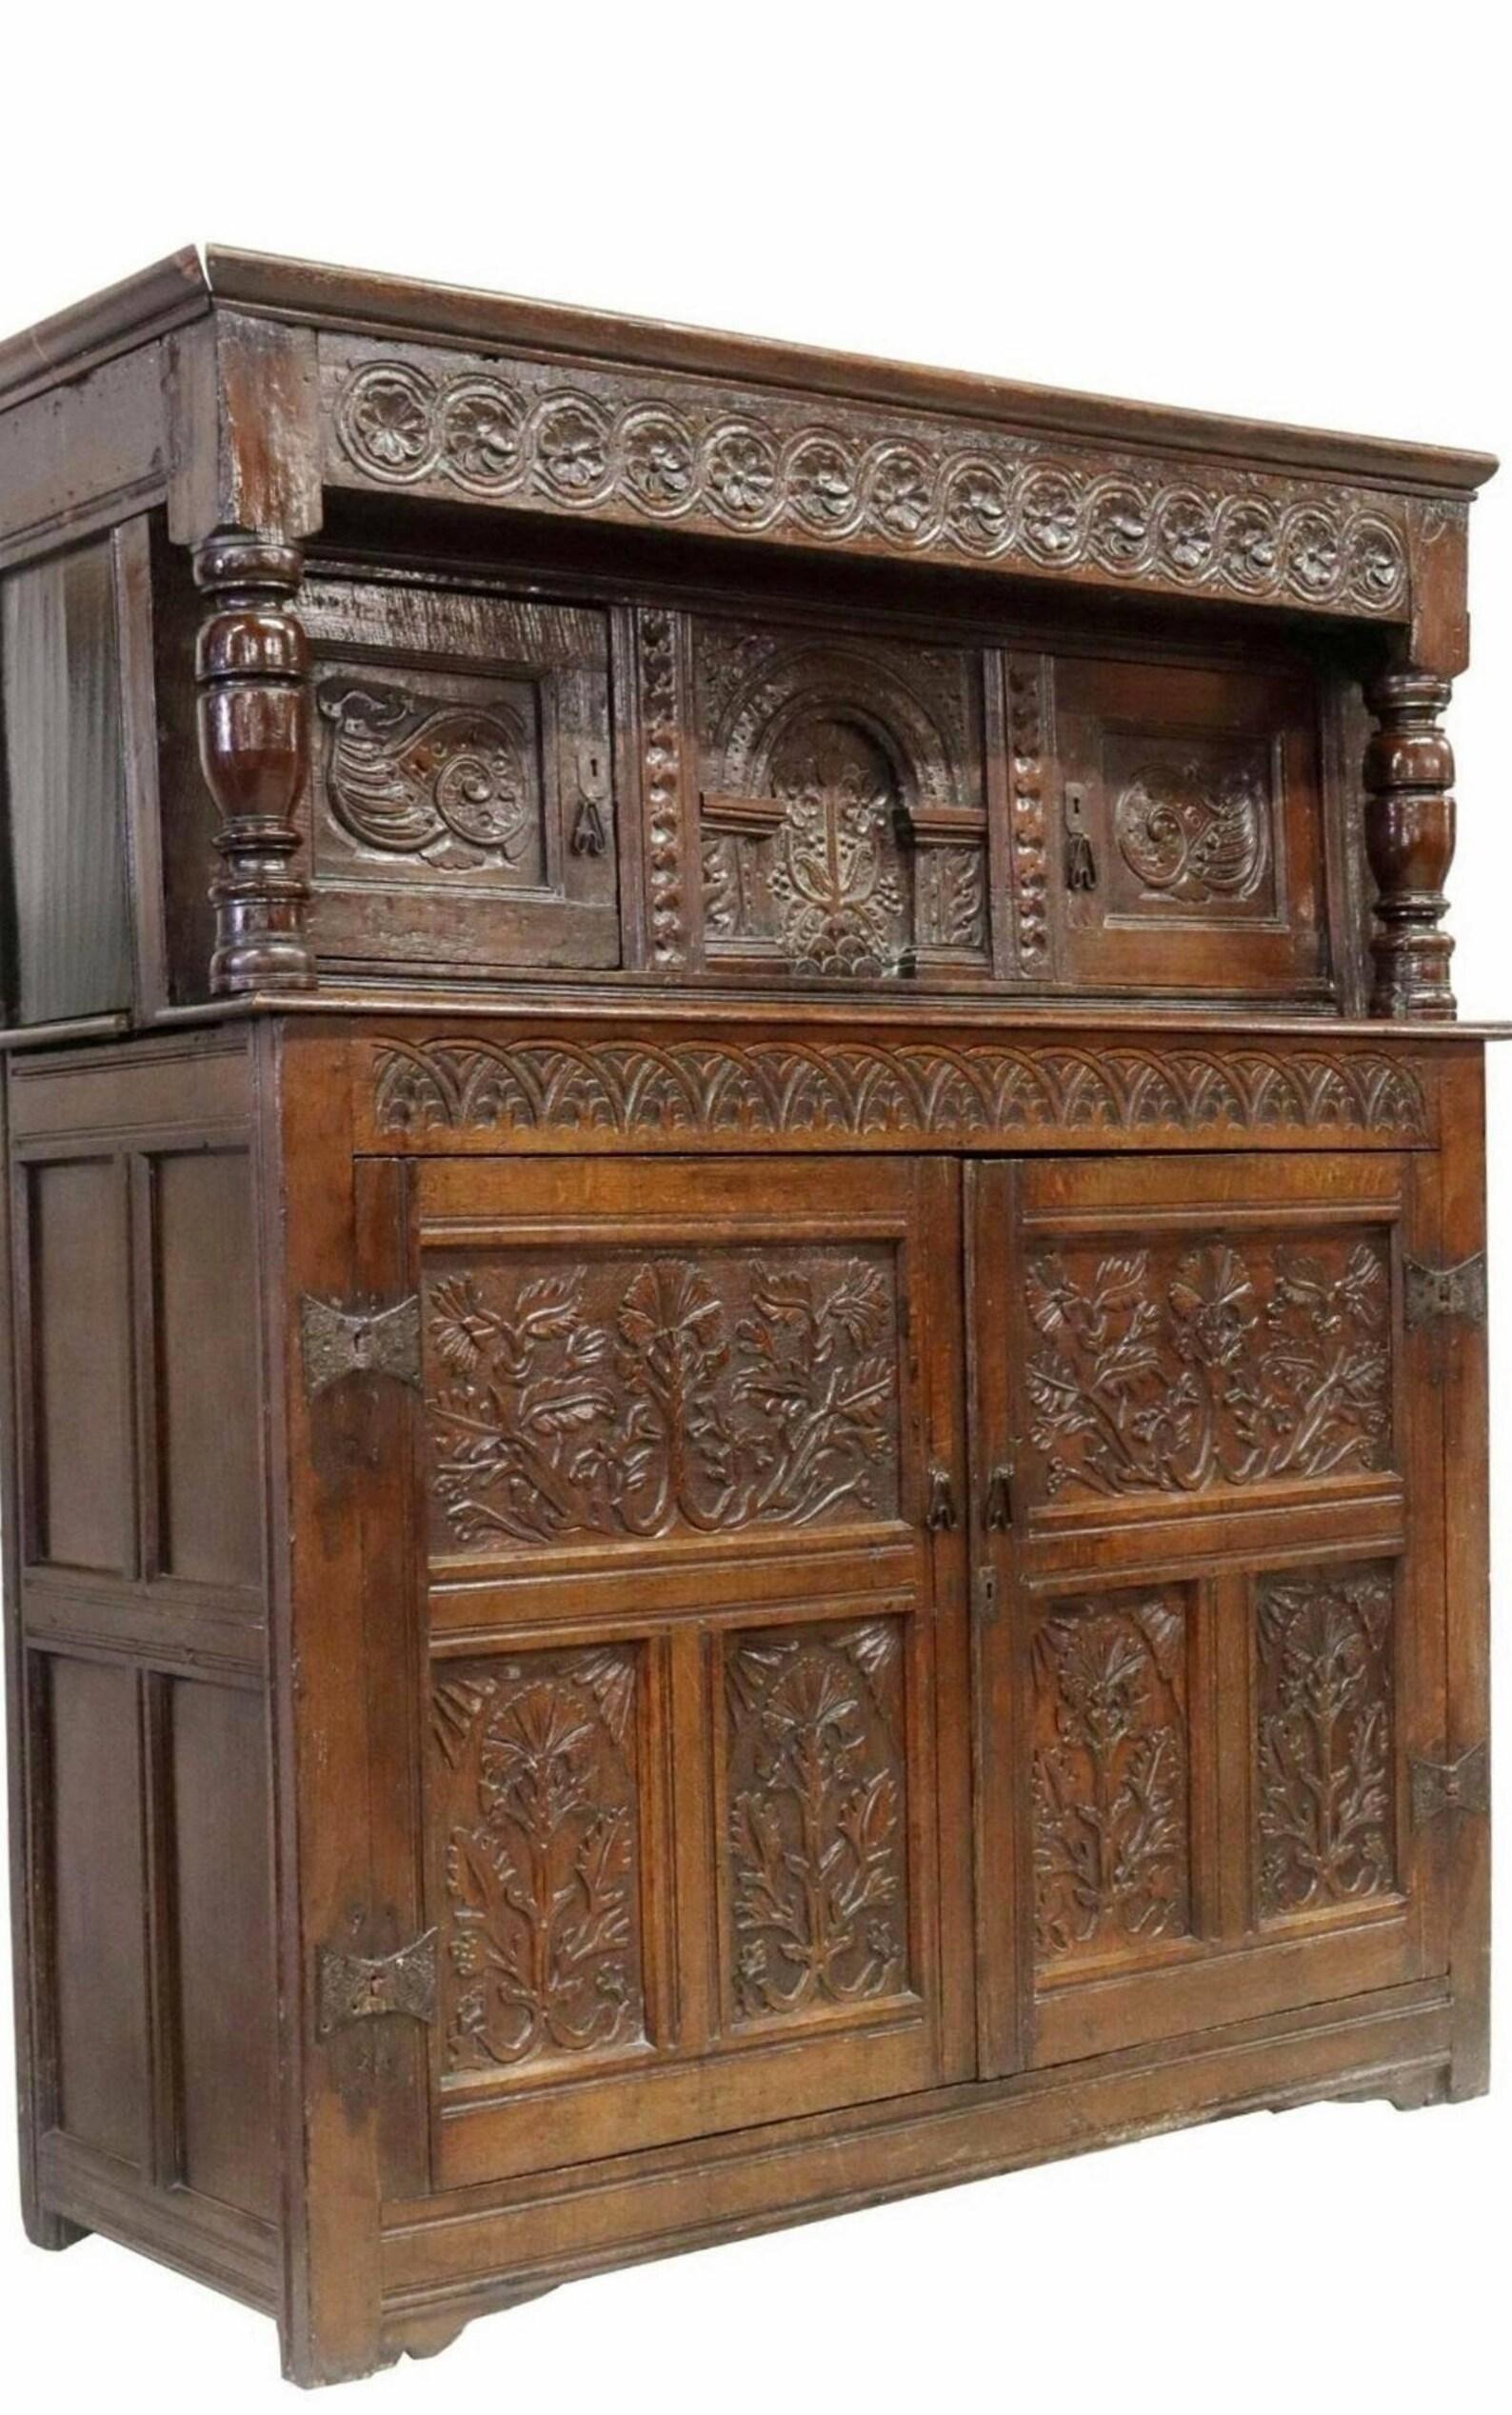 Iron 17th Century, English Carved Oak Court Cupboard Sideboard